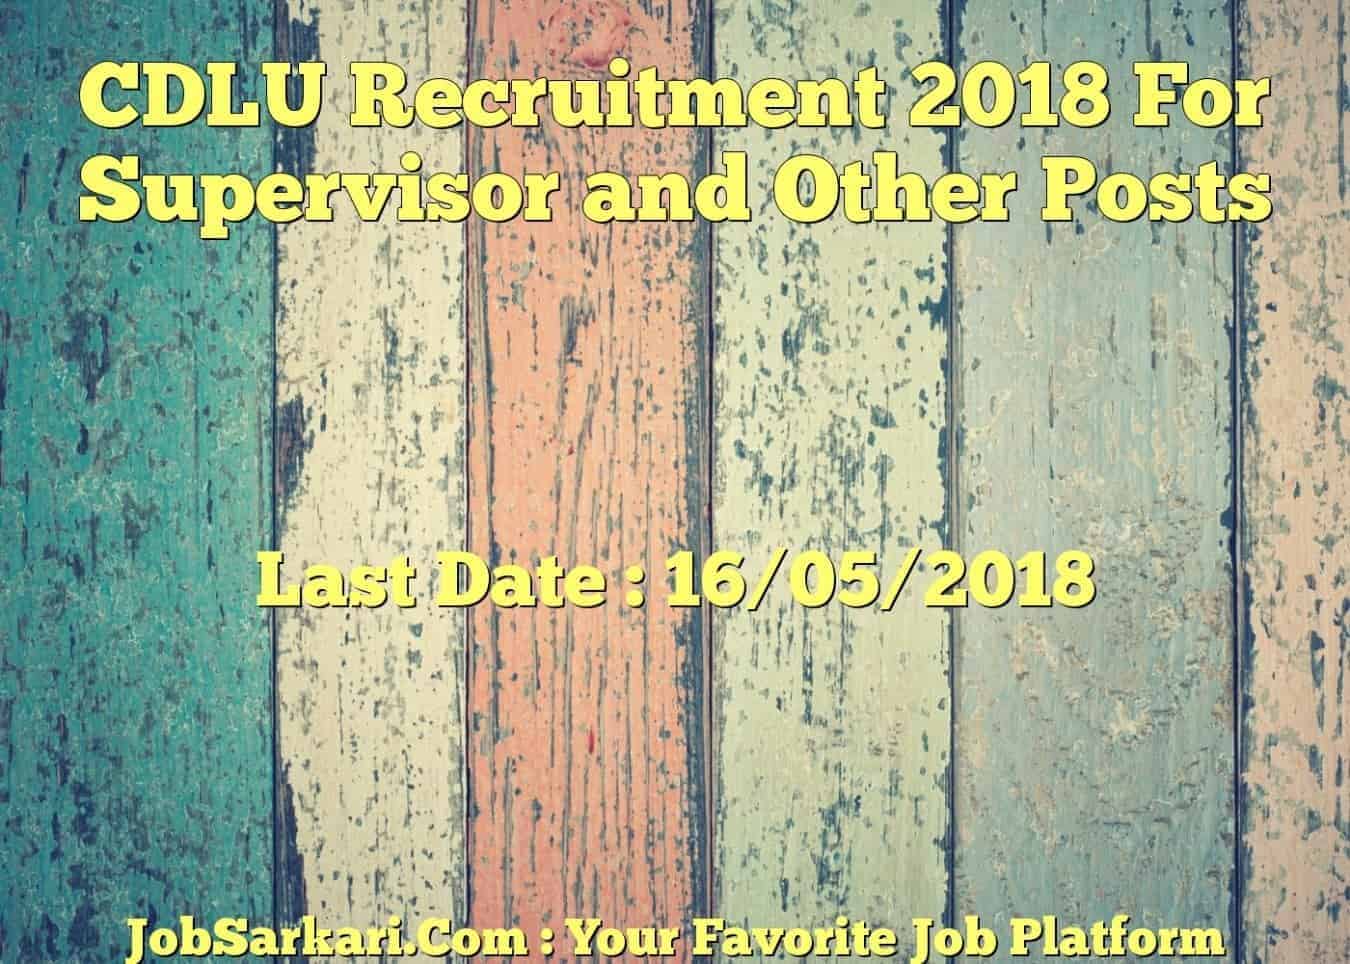 CDLU Recruitment 2018 For Supervisor and Other Posts